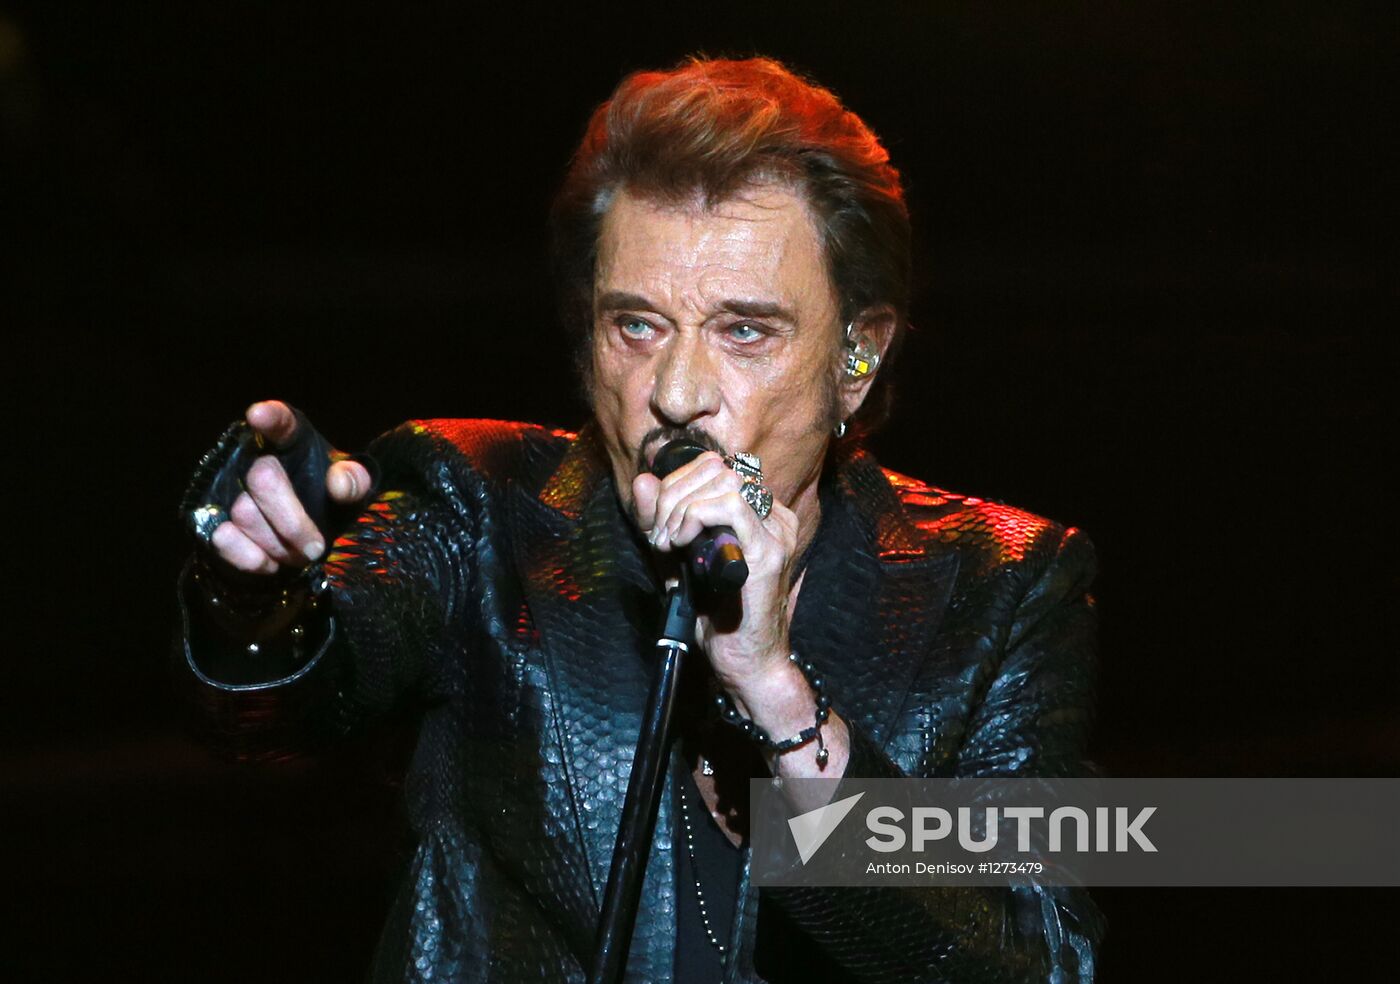 Johnny Hallyday's concert in Moscow